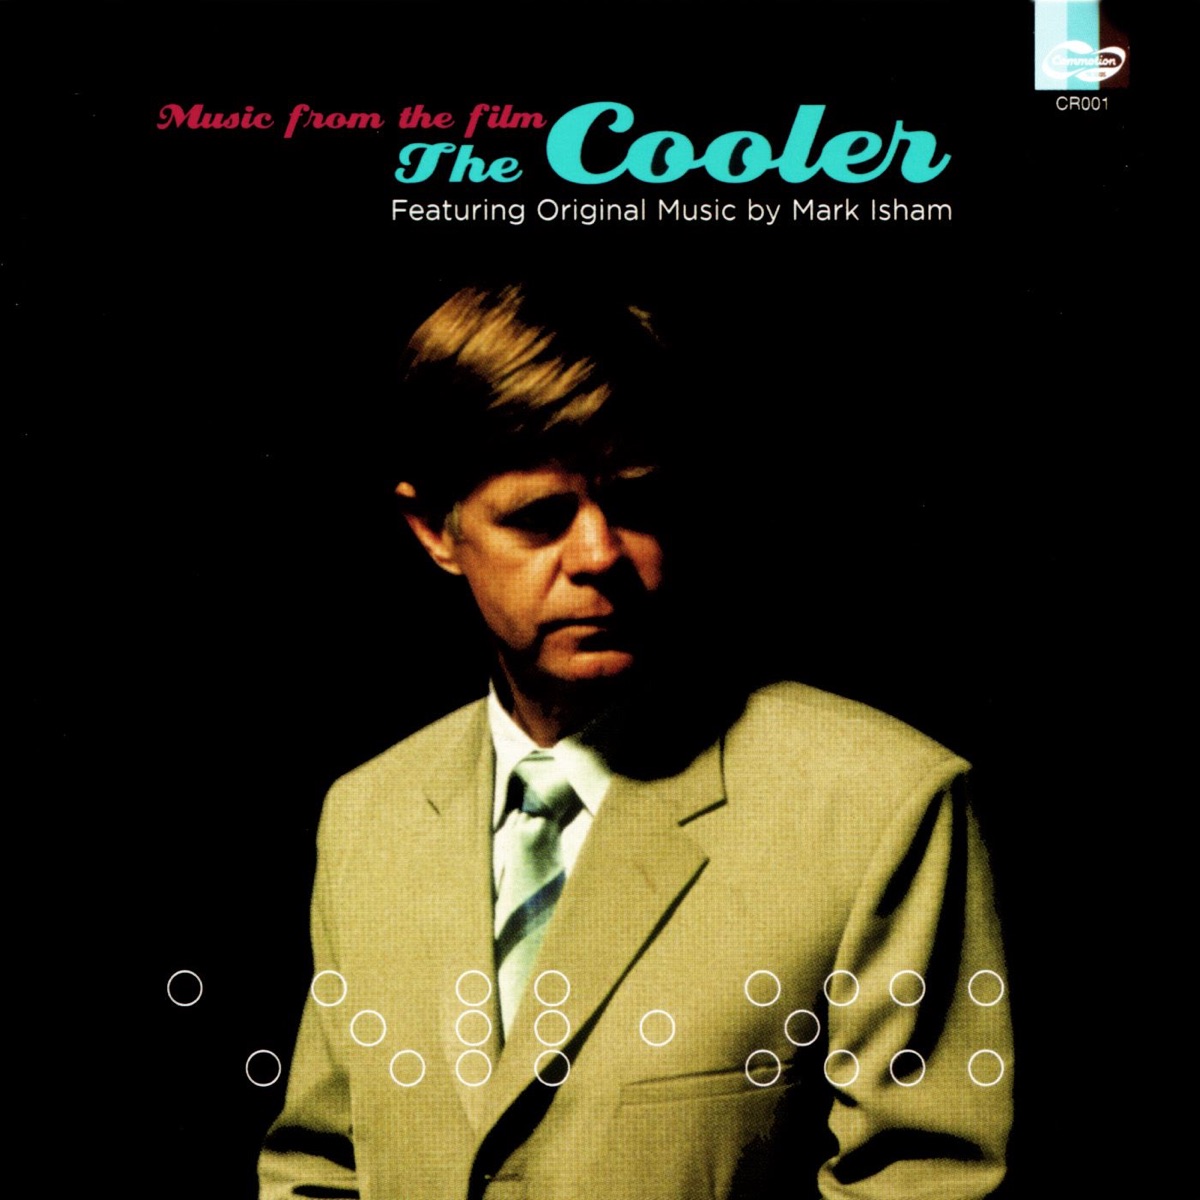 The Cooler (Music from the Film) - Album by Mark Isham - Apple Music